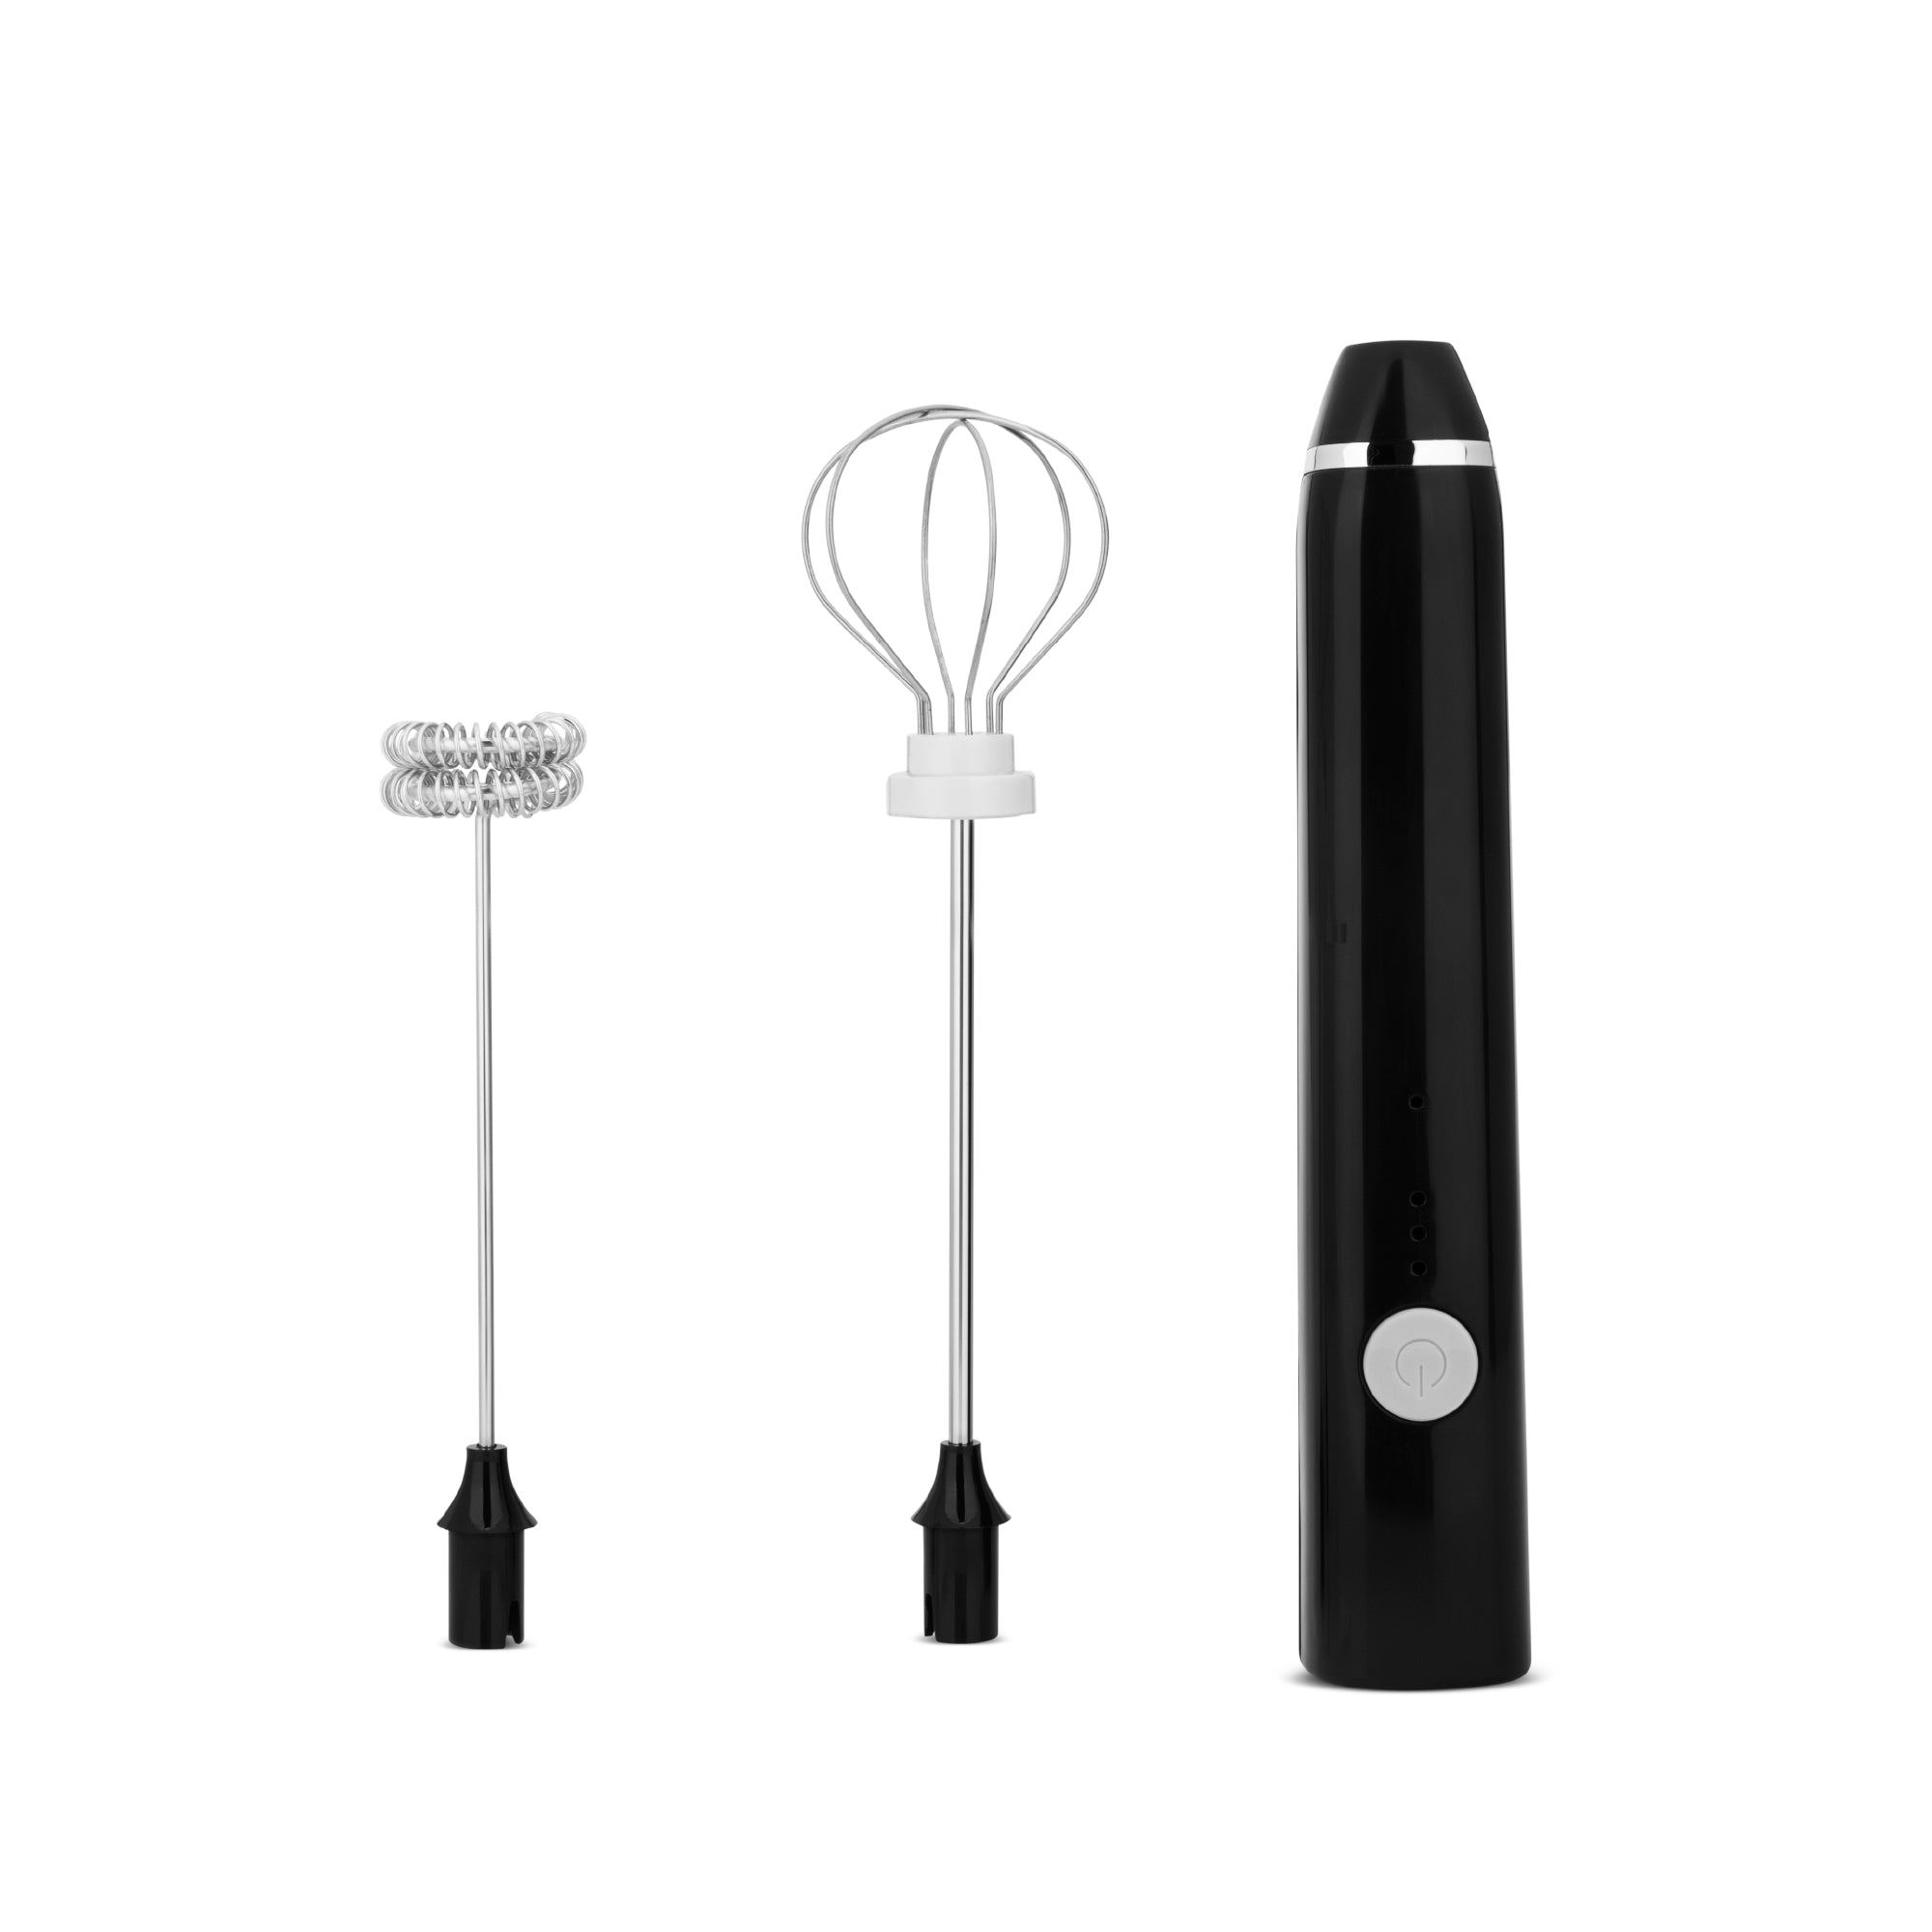 Handheld Electric Milk Frother Whisk